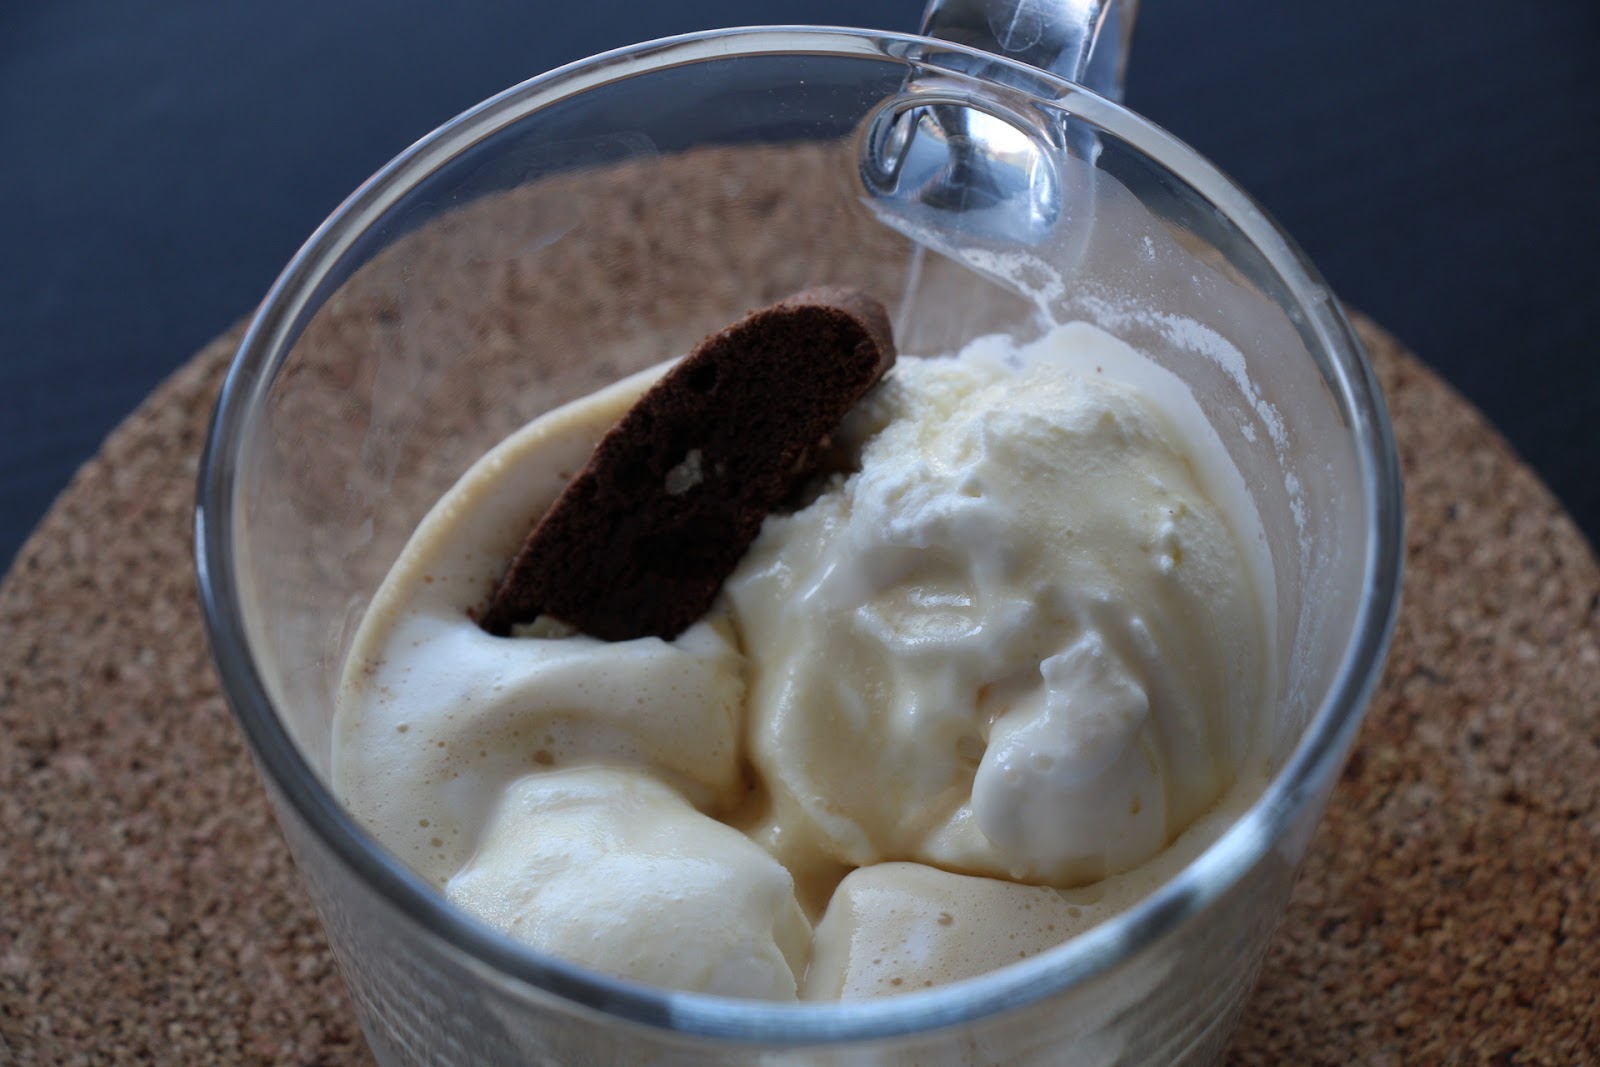 A dessert of affogato in a transparent glass cup, featuring creamy vanilla ice cream partially melted by a shot of hot espresso, topped with a chocolate biscotti.